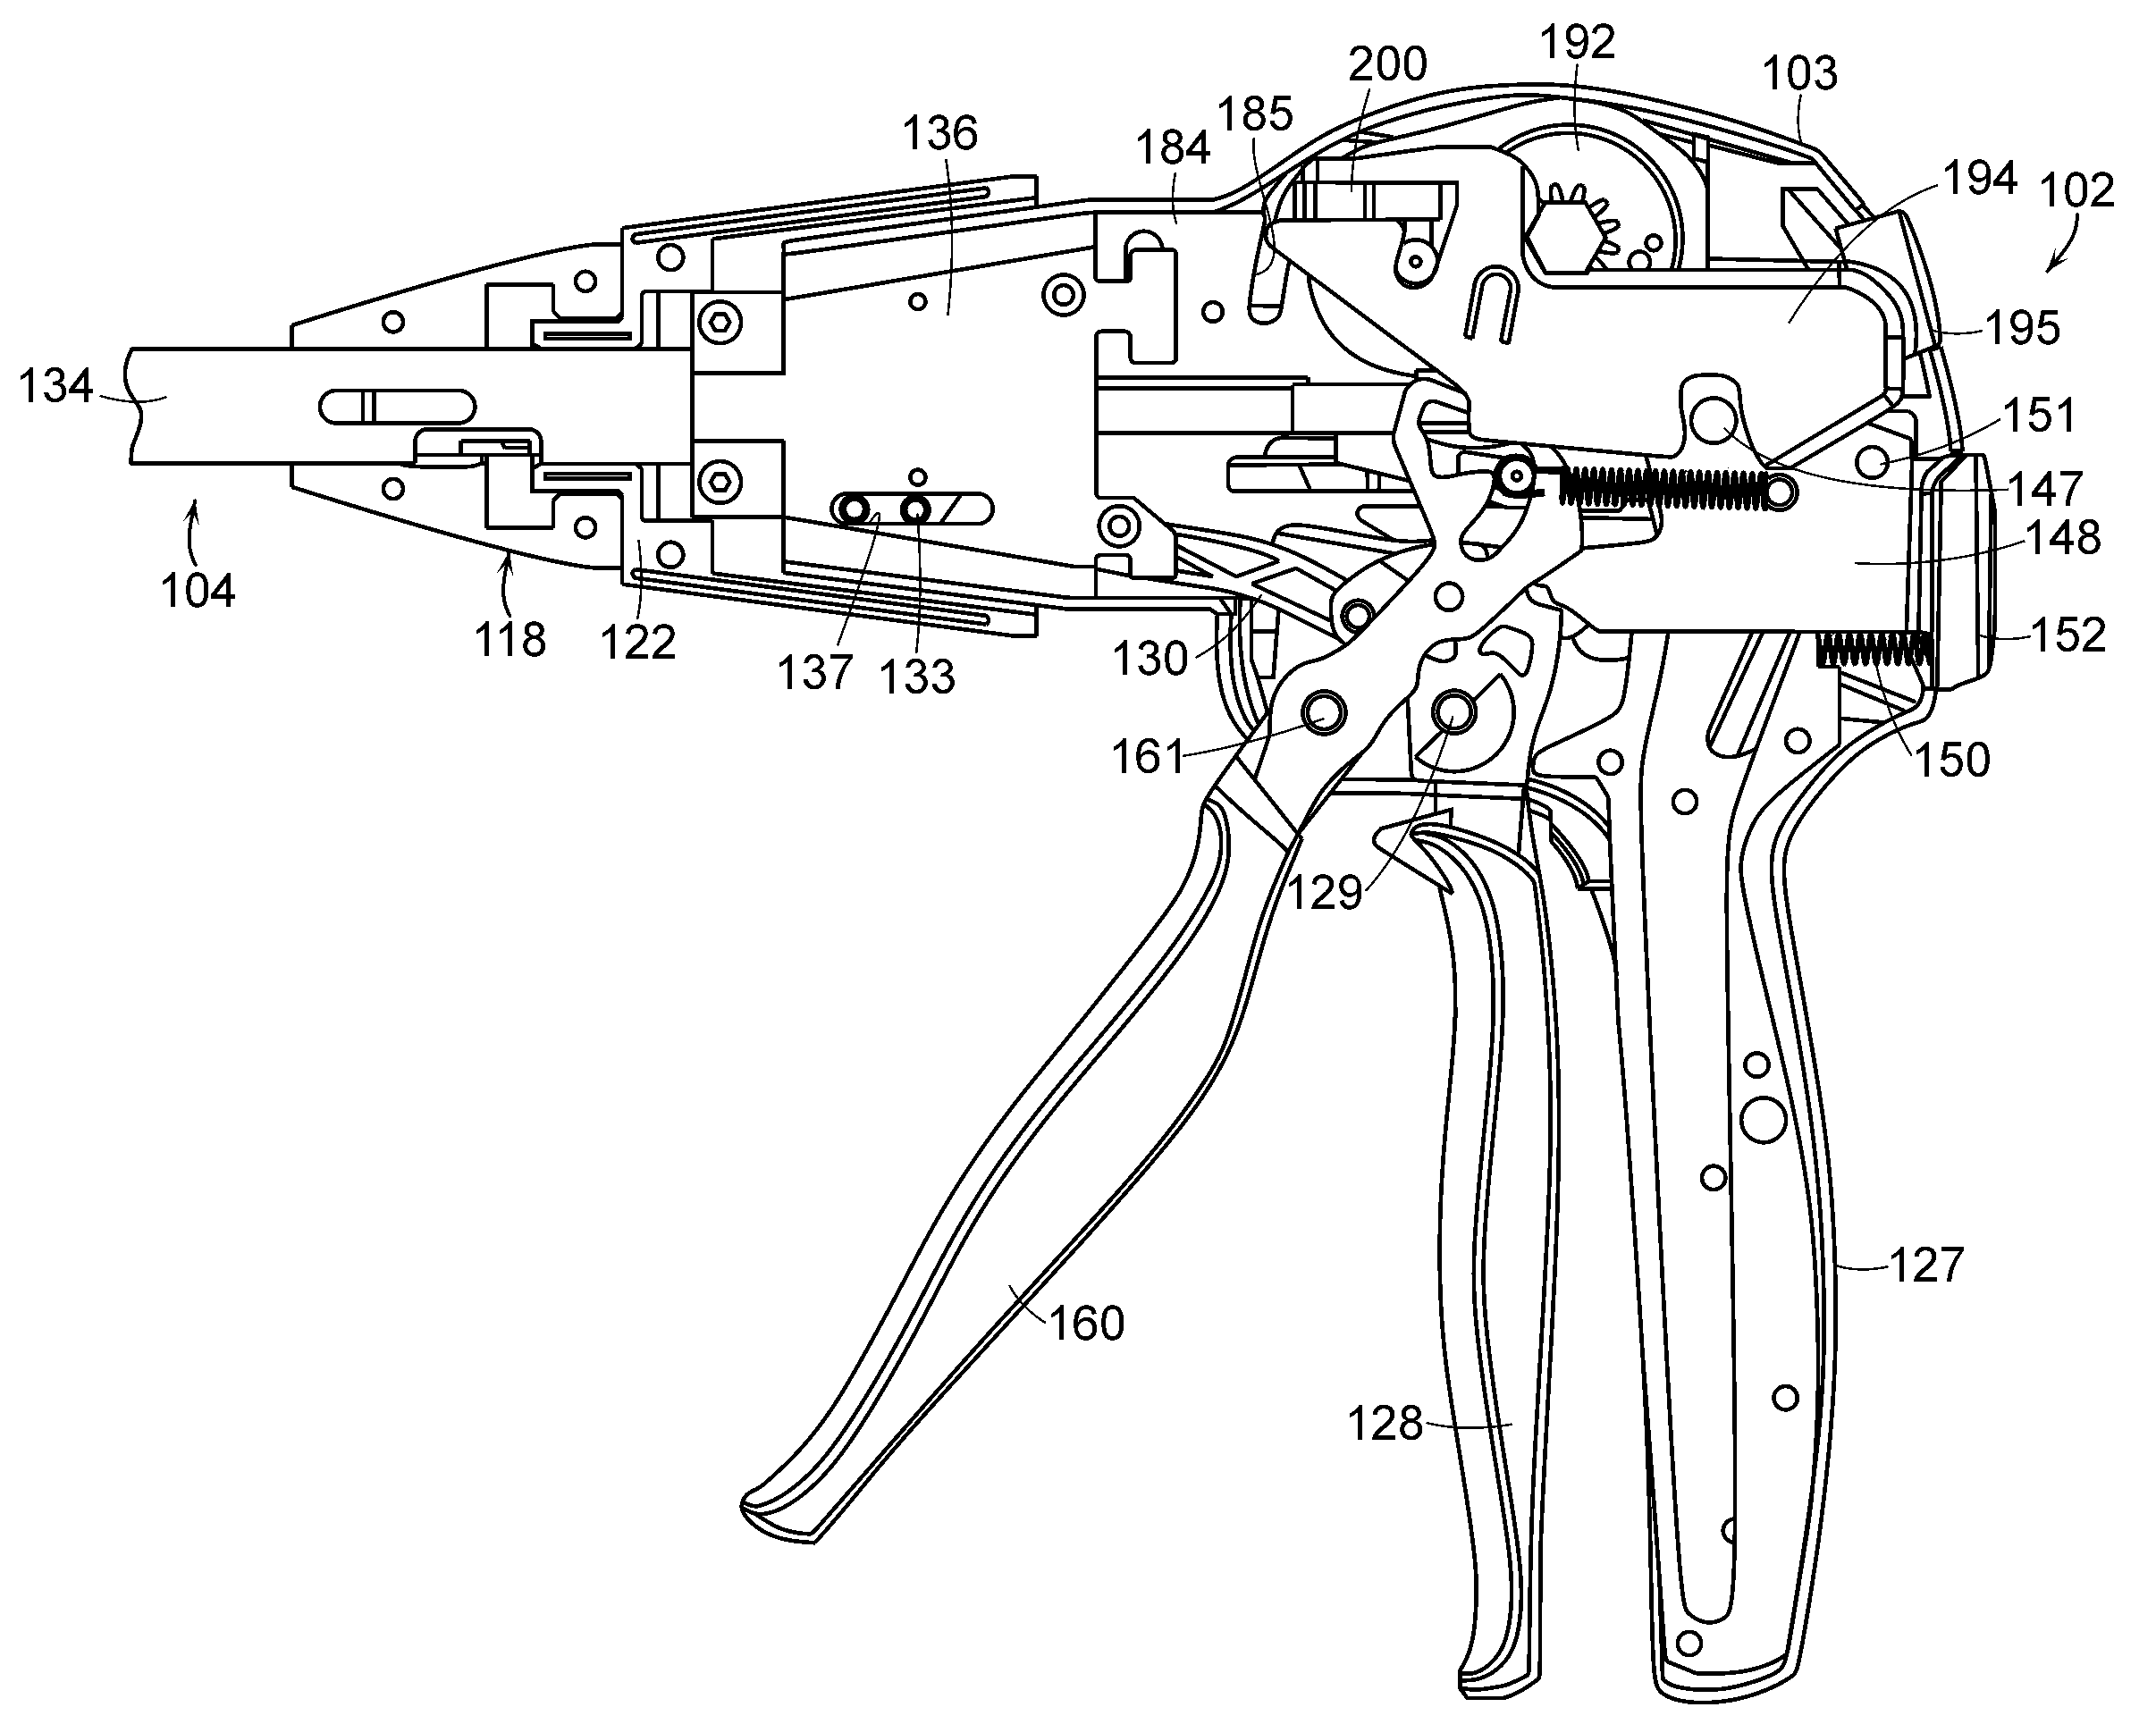 End effector closure system for a surgical stapling instrument